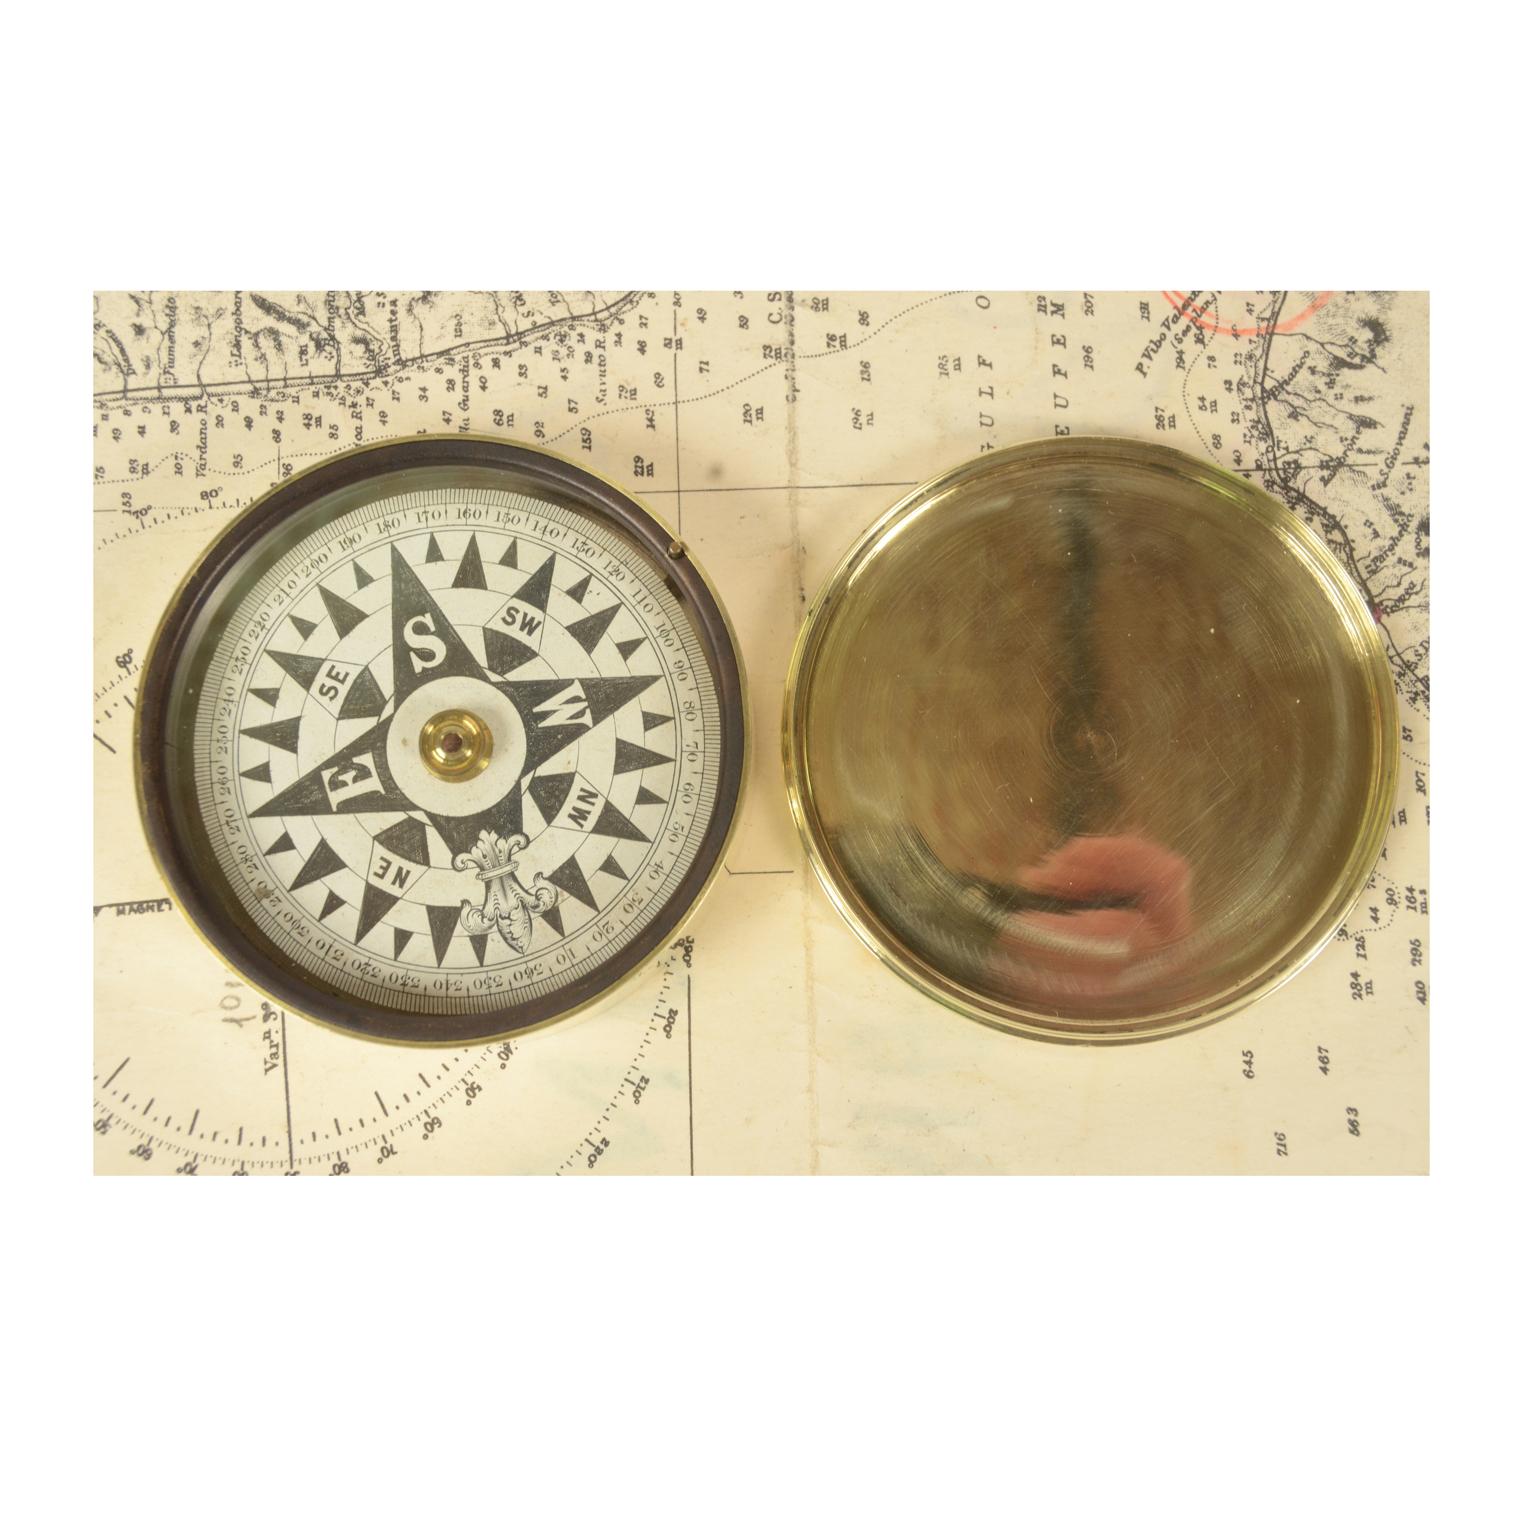 Small nautical pocket compass in its original turned brass case complete with compass card block. On the side an engraving has the name of the owner F. B. Spicer and the name of Filey, an English town in North Yorkshire. English manufacture second